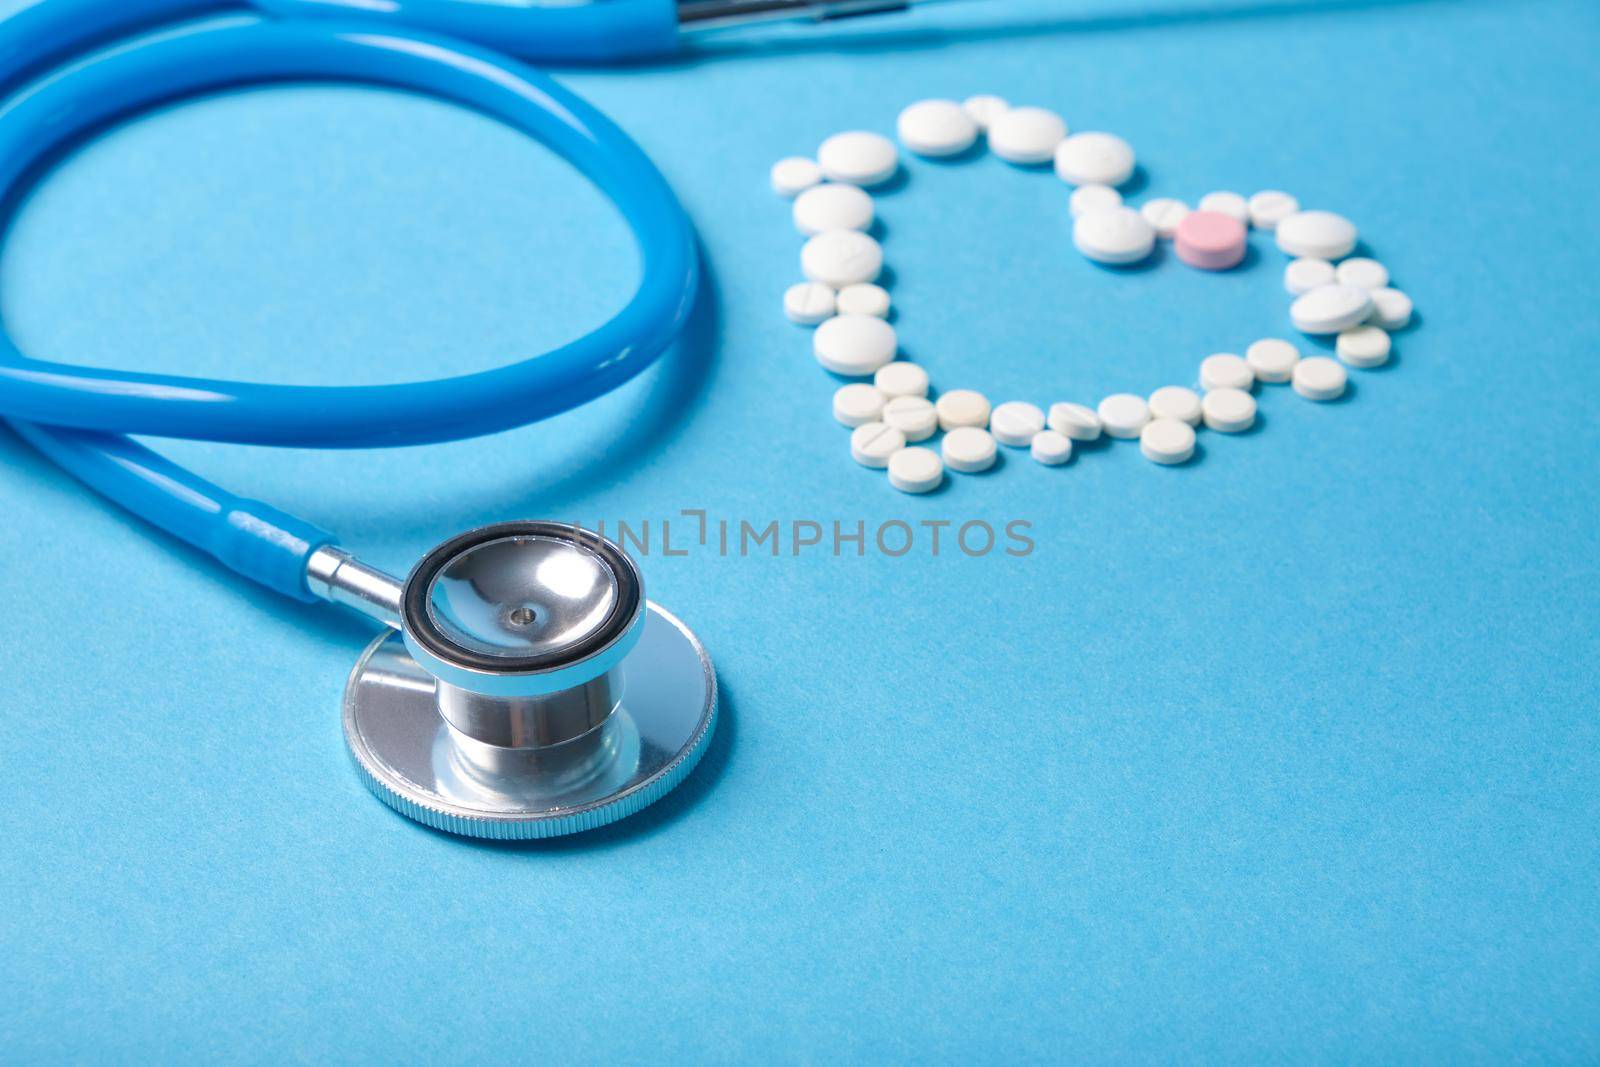 stethoscope and heart from pills on blue background, cardiology concept by natashko